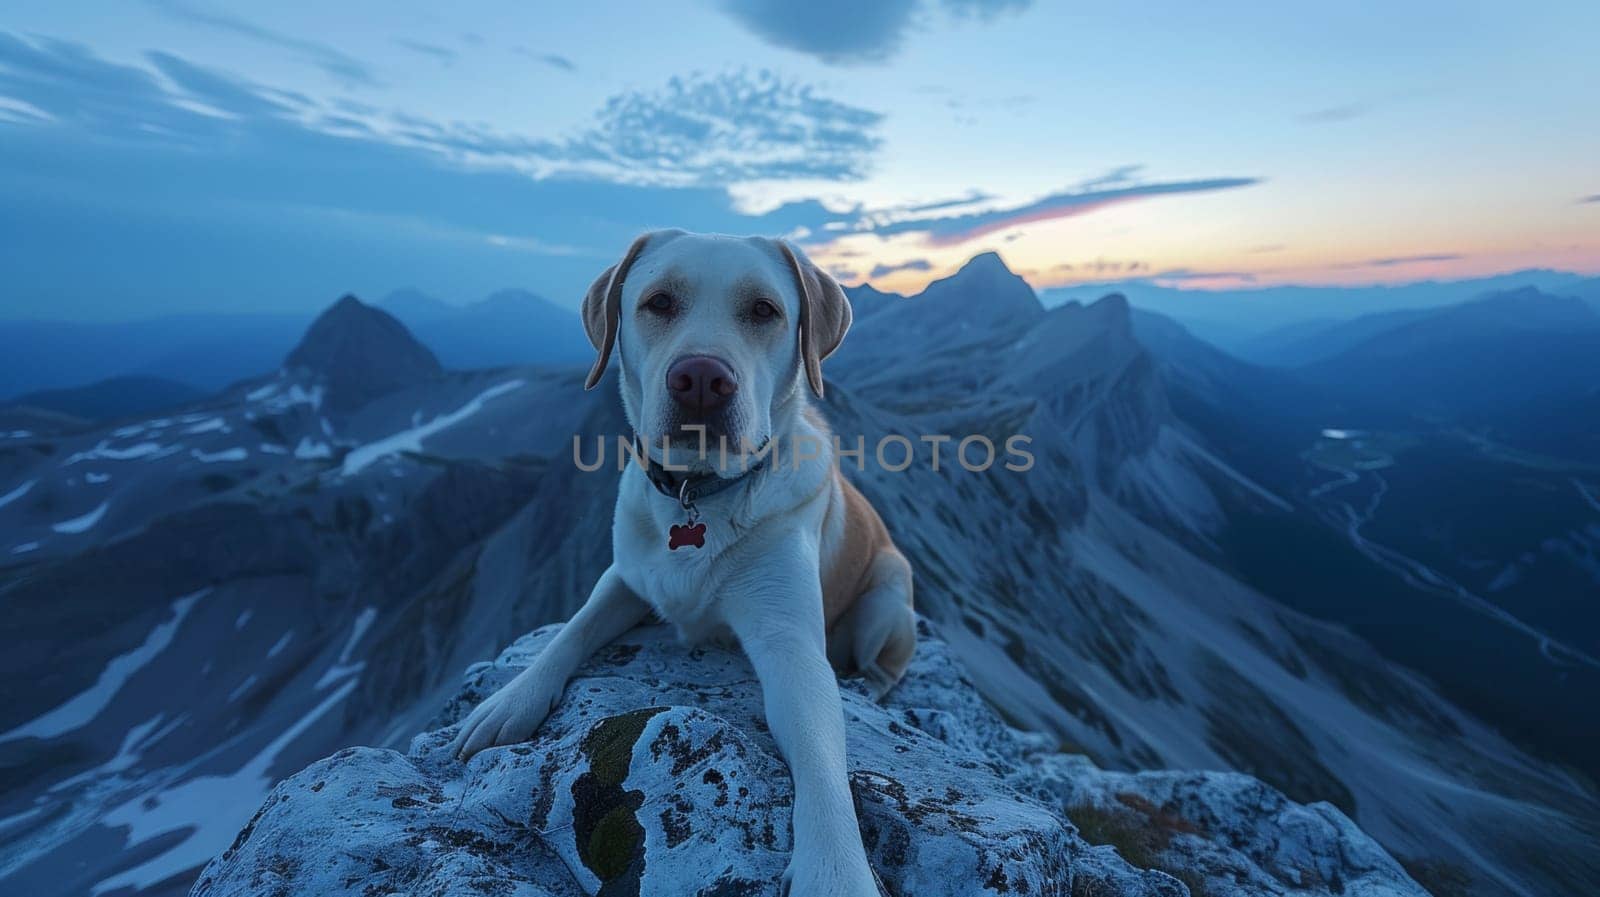 A dog sitting on top of a mountain with mountains in the background, AI by starush